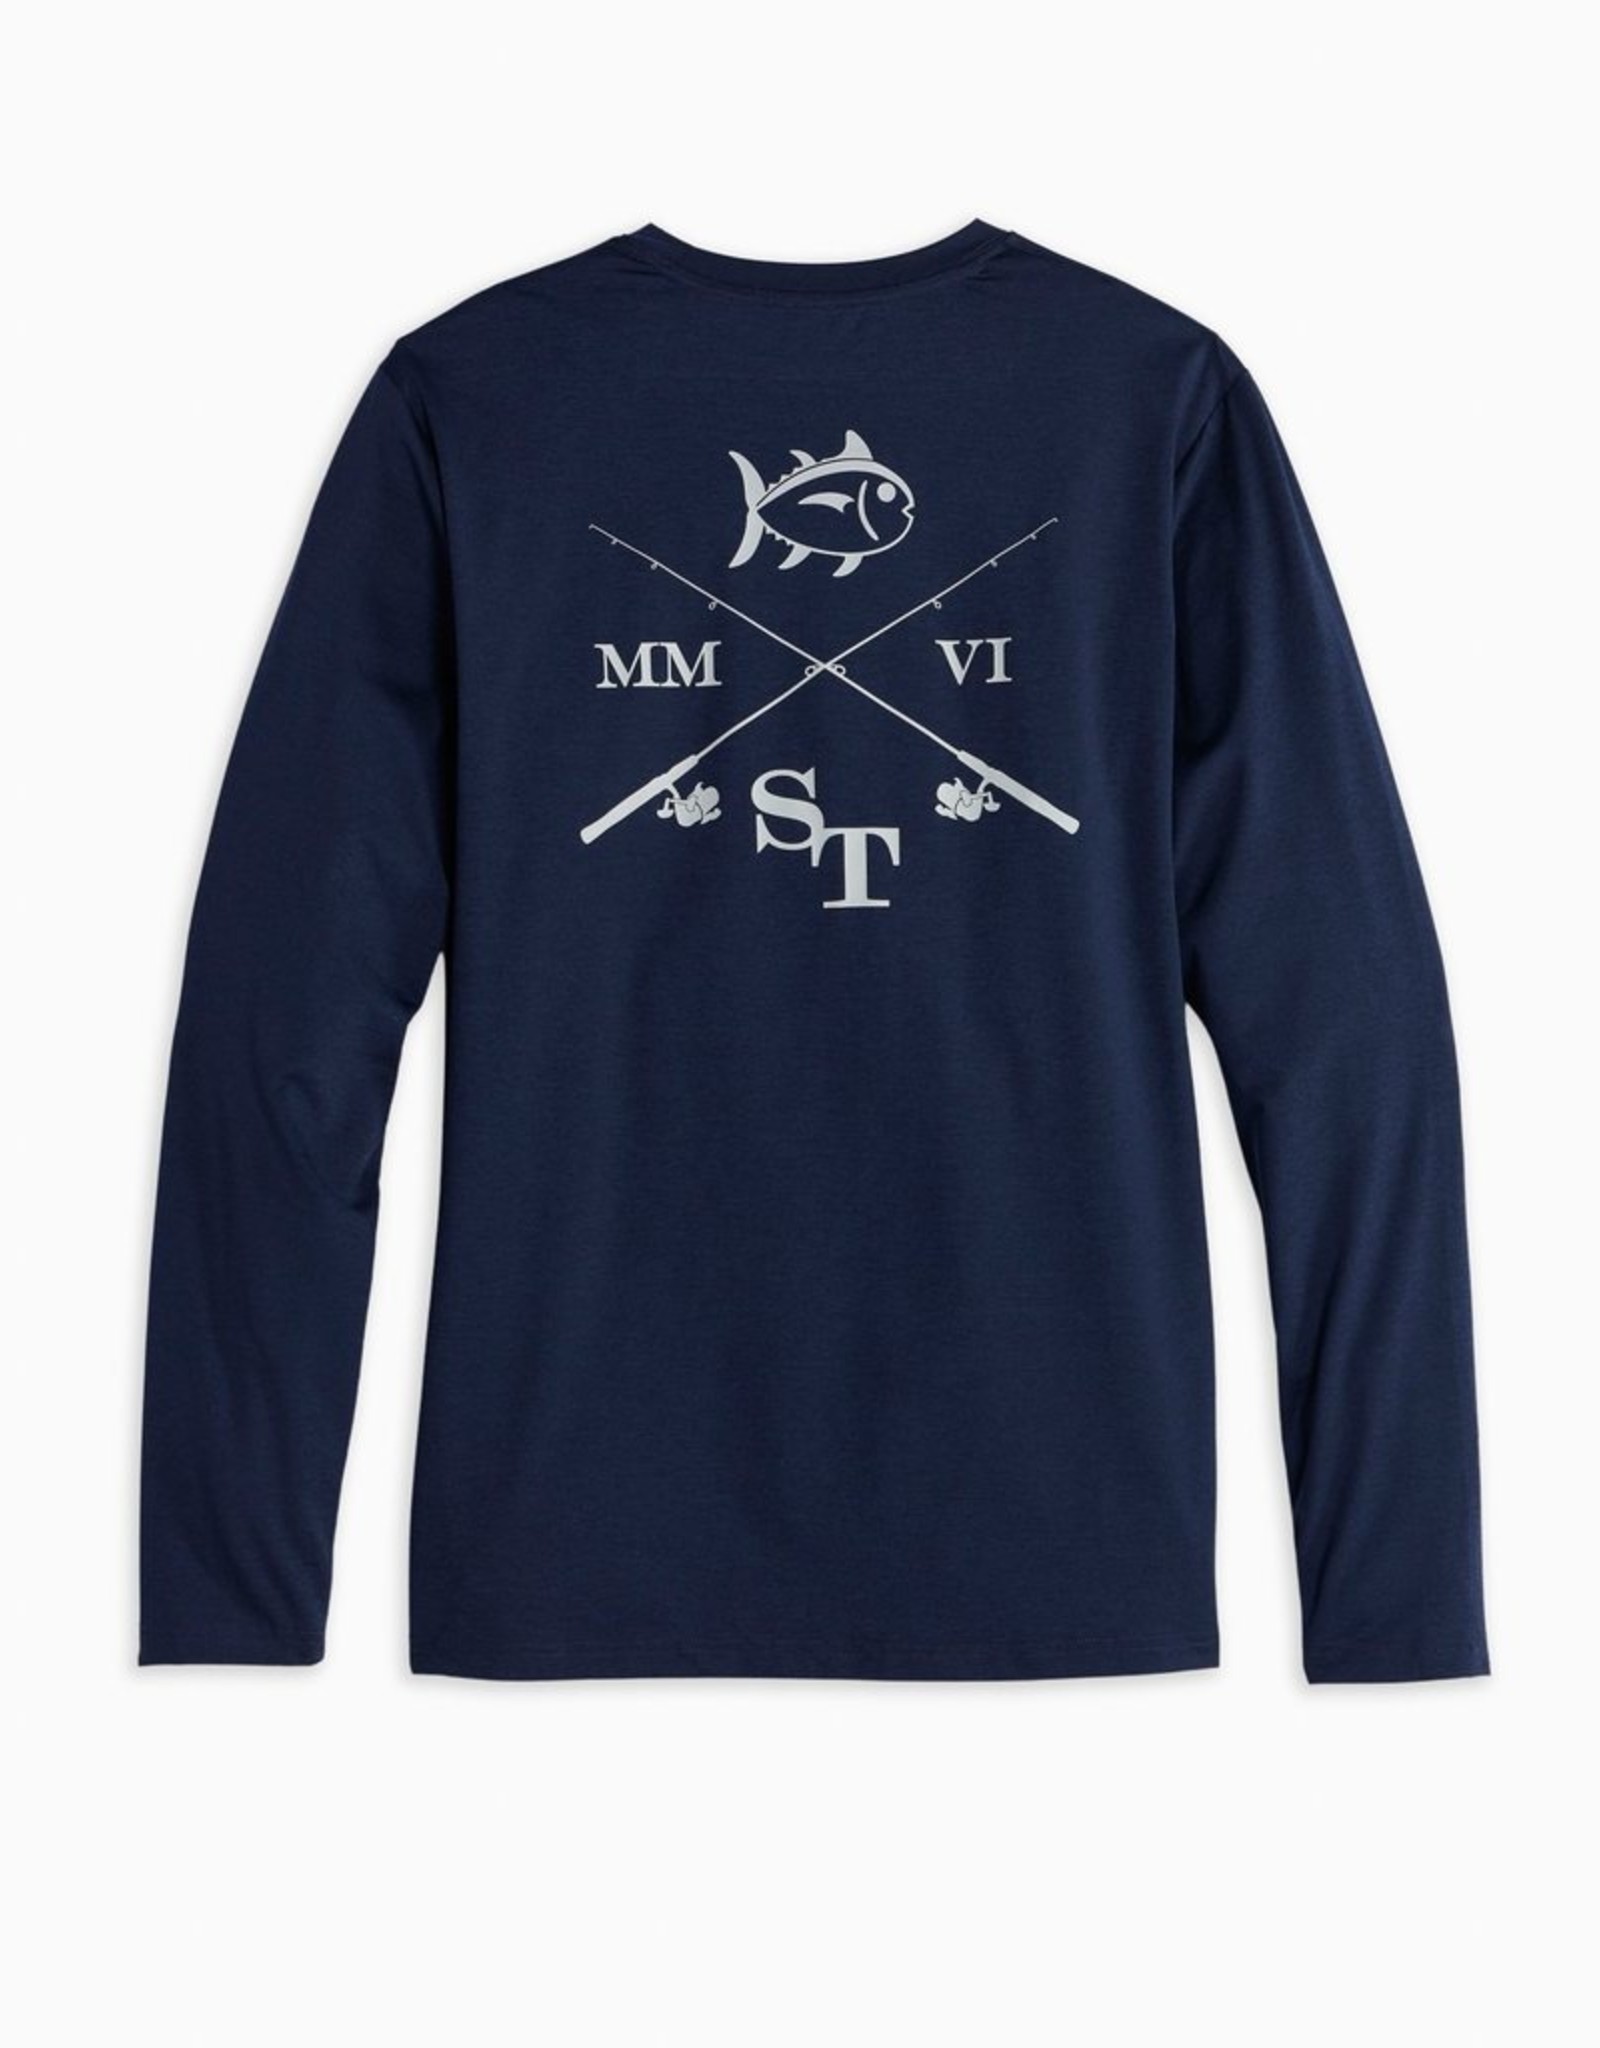 Southern Tide Crossed Fishing Performance Tee